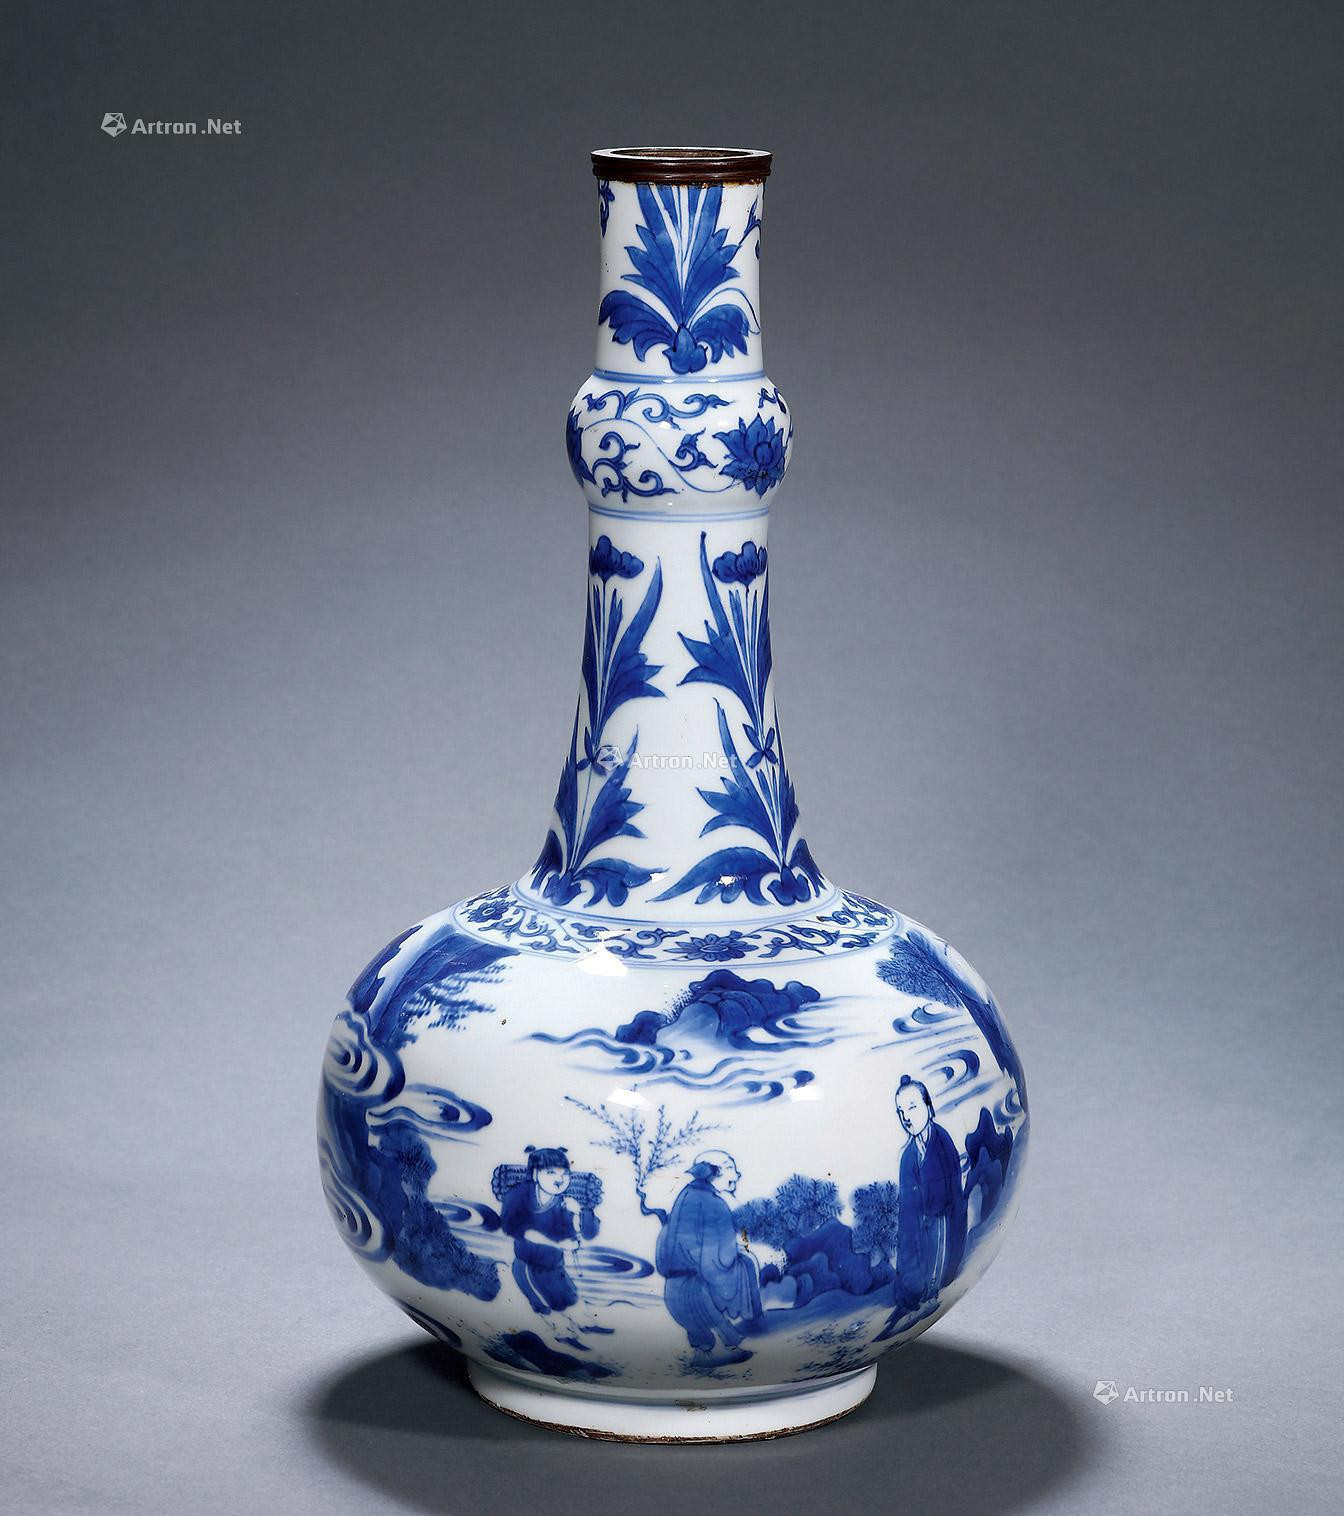 A BLUE AND WHITE LONG NECK VASE WITH FIGURES DESIGN